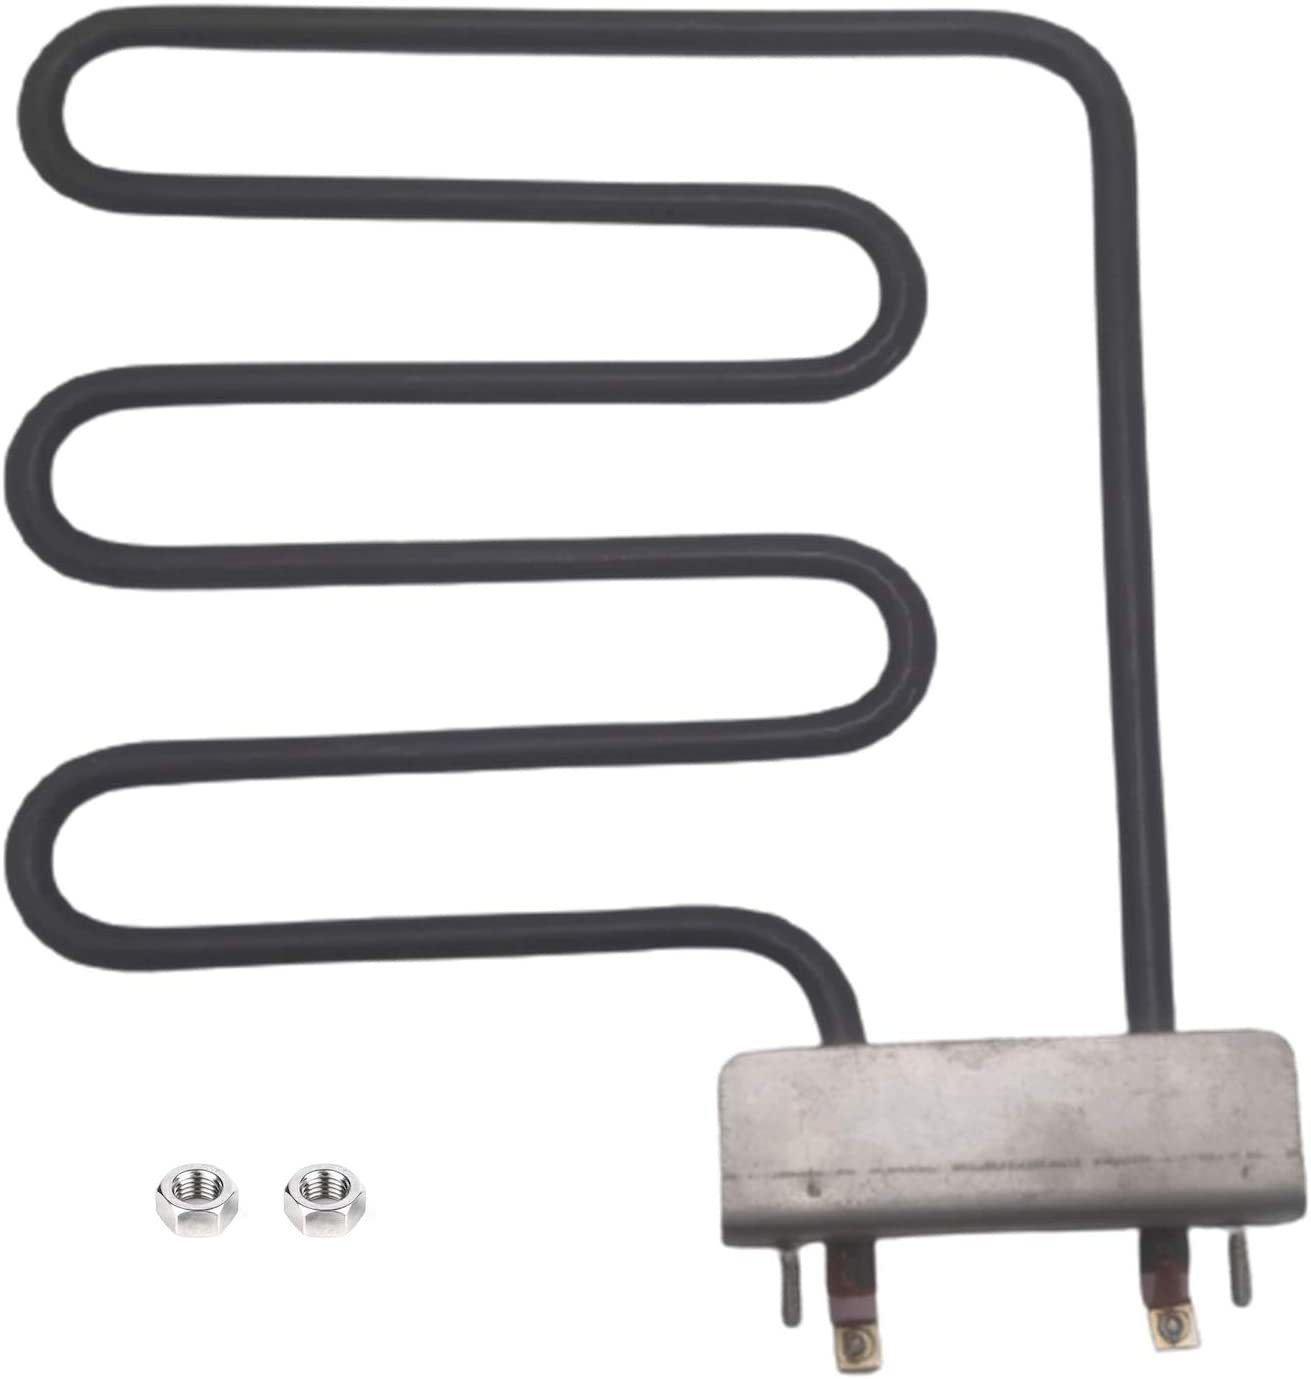 Replacement Electric Smoker 800 Watts Heating Element For Char-Broil And - $36.99